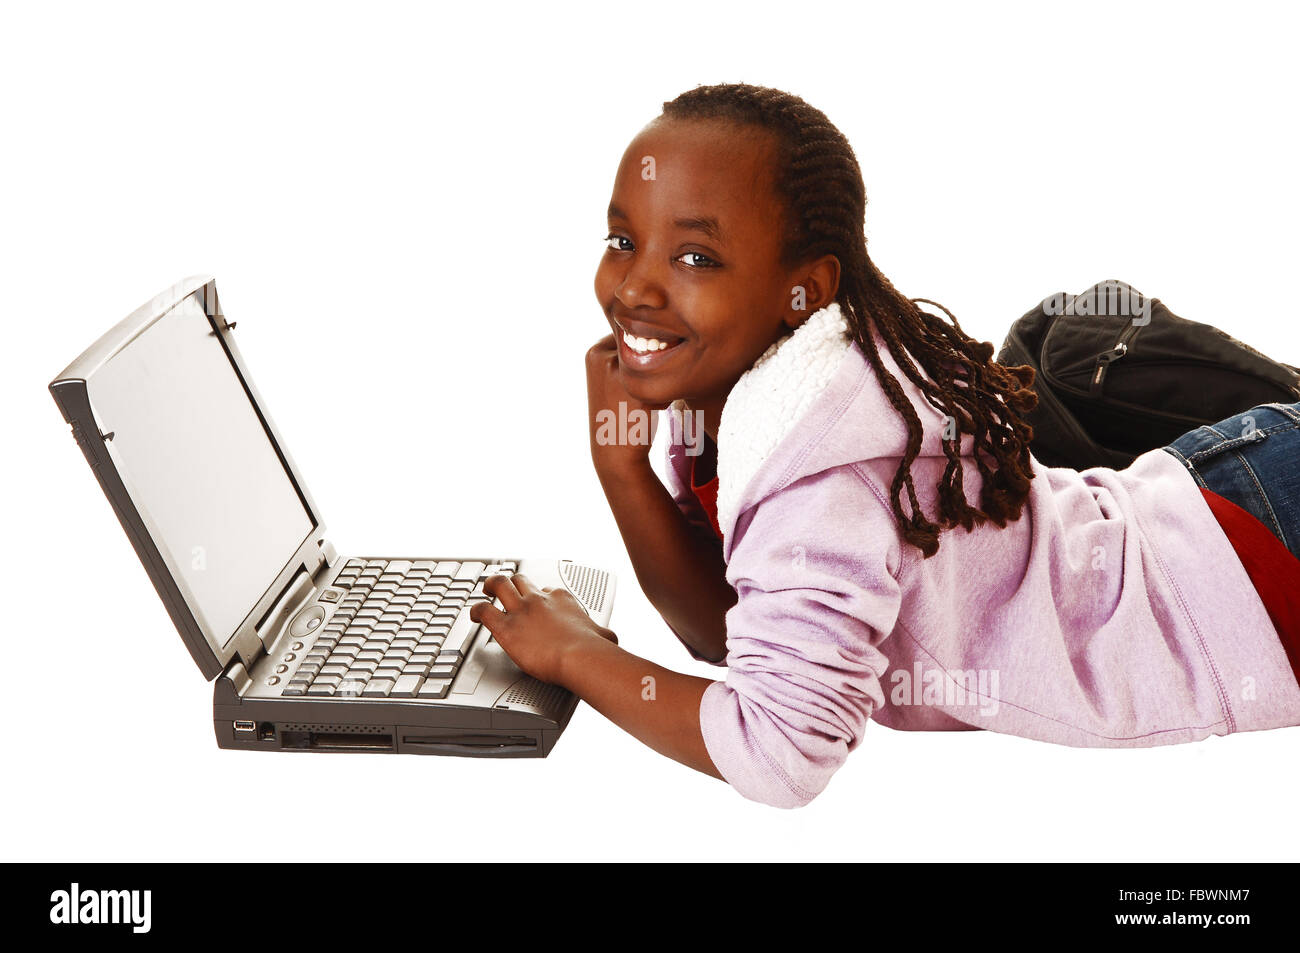 Teen girl with laptop. Stock Photo